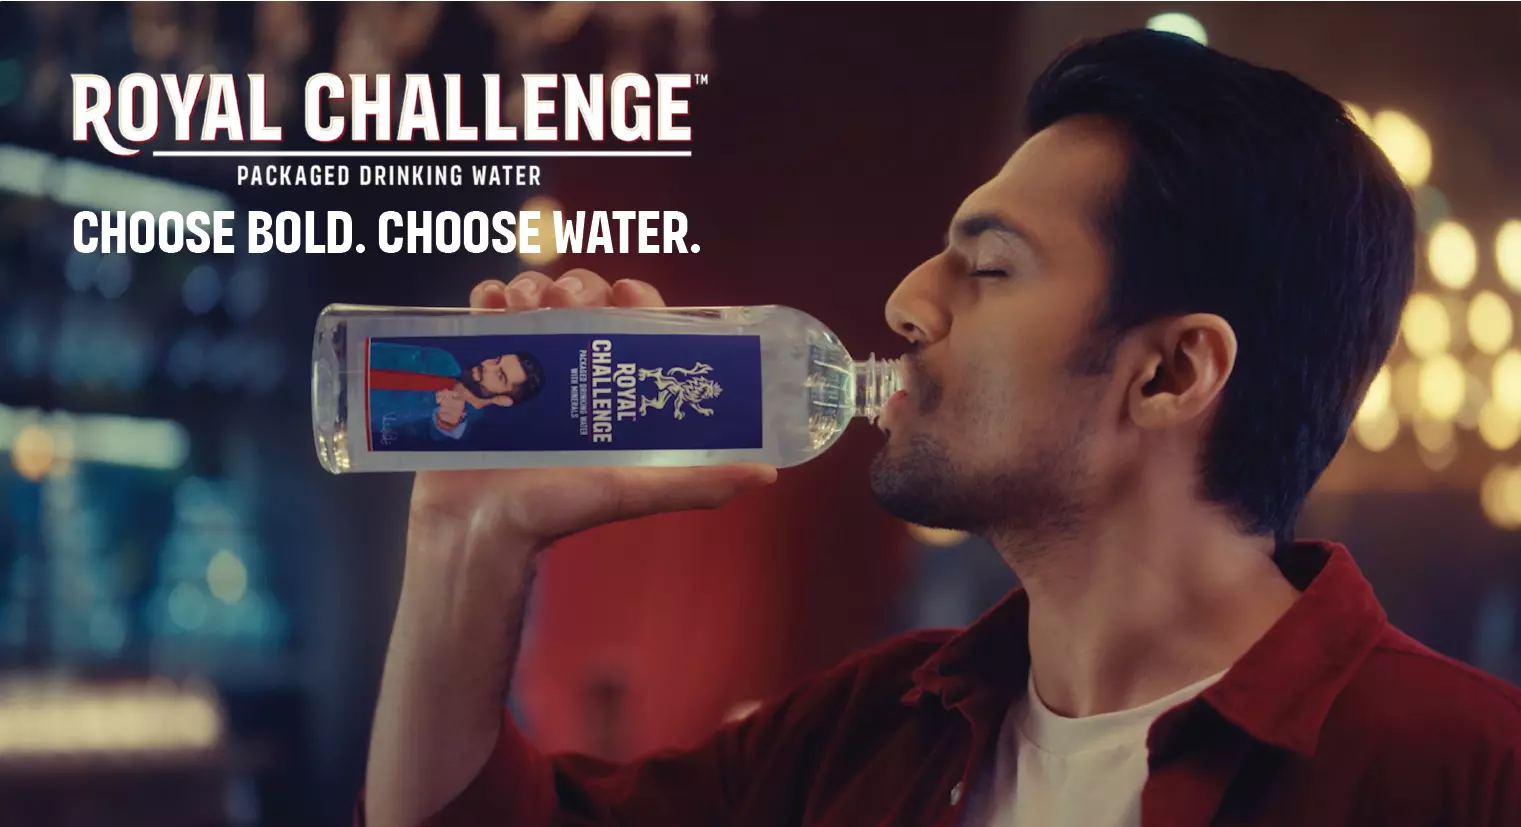 Royal Challenge Packaged Drinking Water